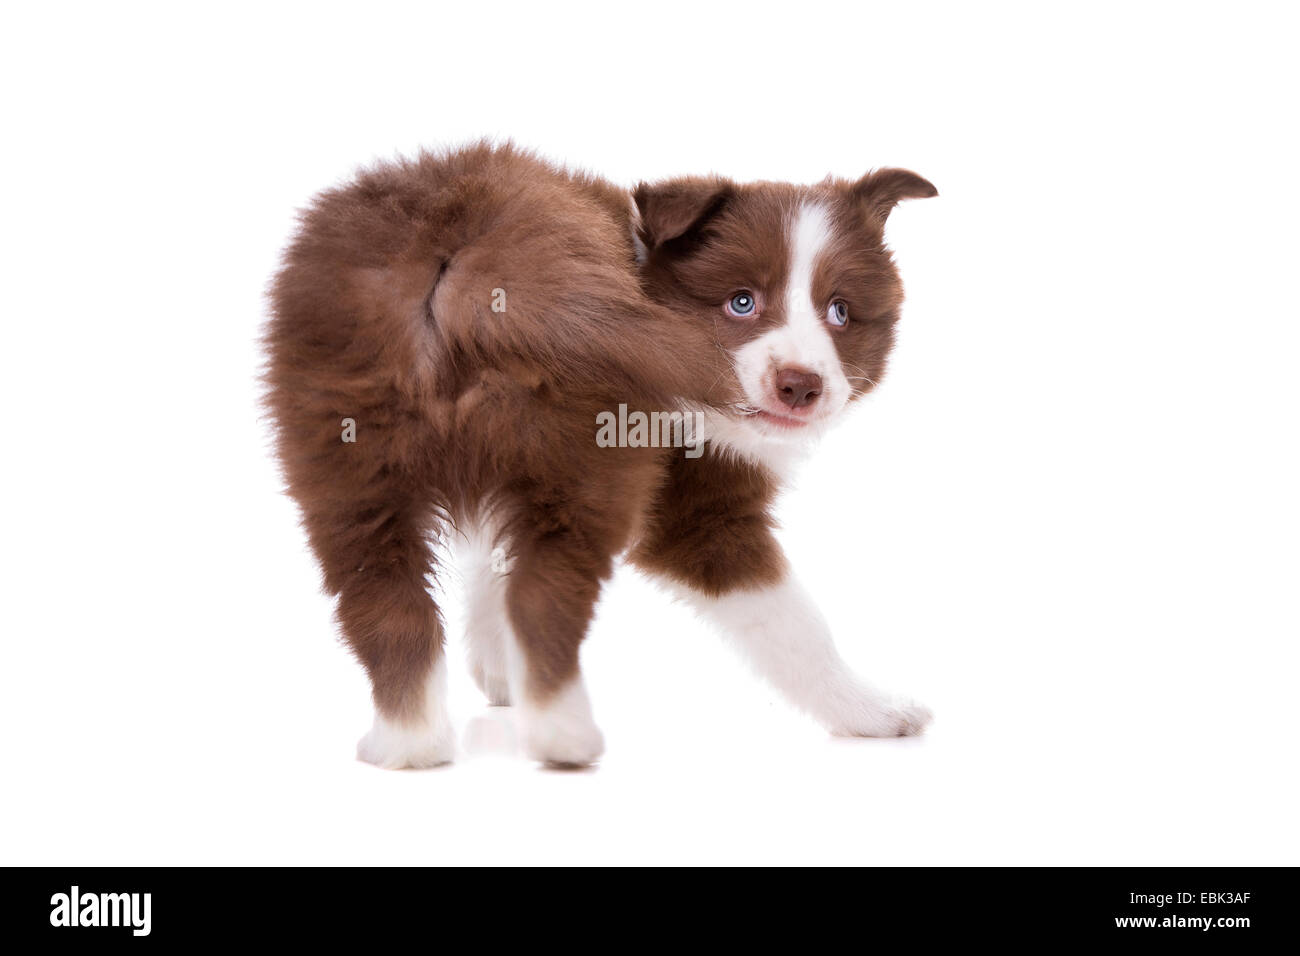 Border Collie puppy dog biting its own tail in front of a white background Stock Photo